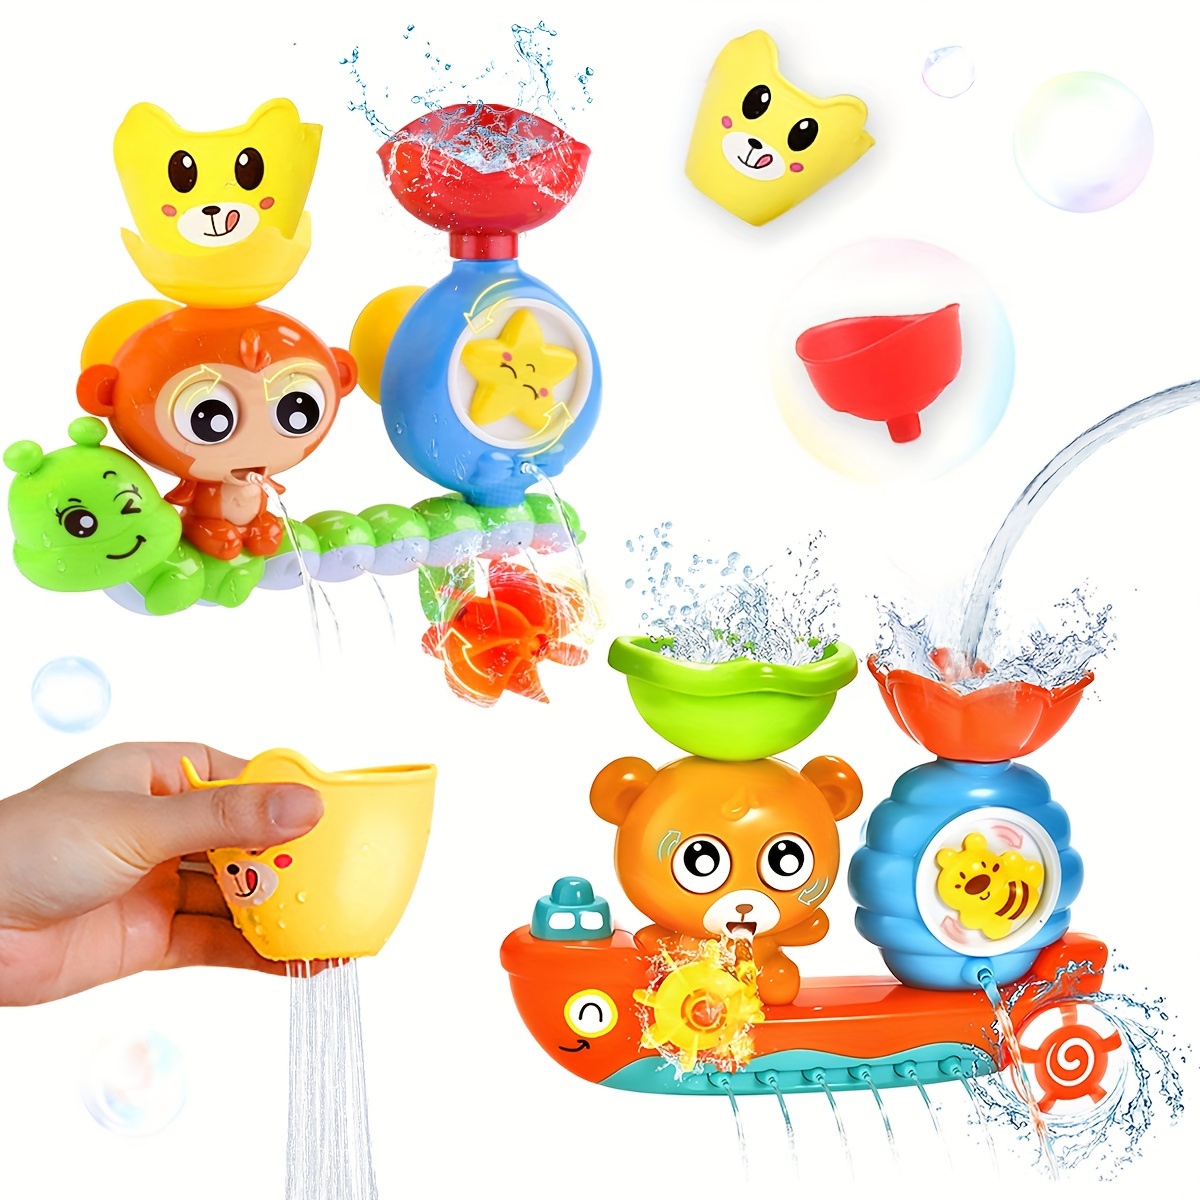 Supermandulit Fishing Toys Playset, Bathtub Bath Pool Toy Set For Water Table Ocean Sea Animals Fish Water Game Kids Pool Party Pool Toys Water Toys S